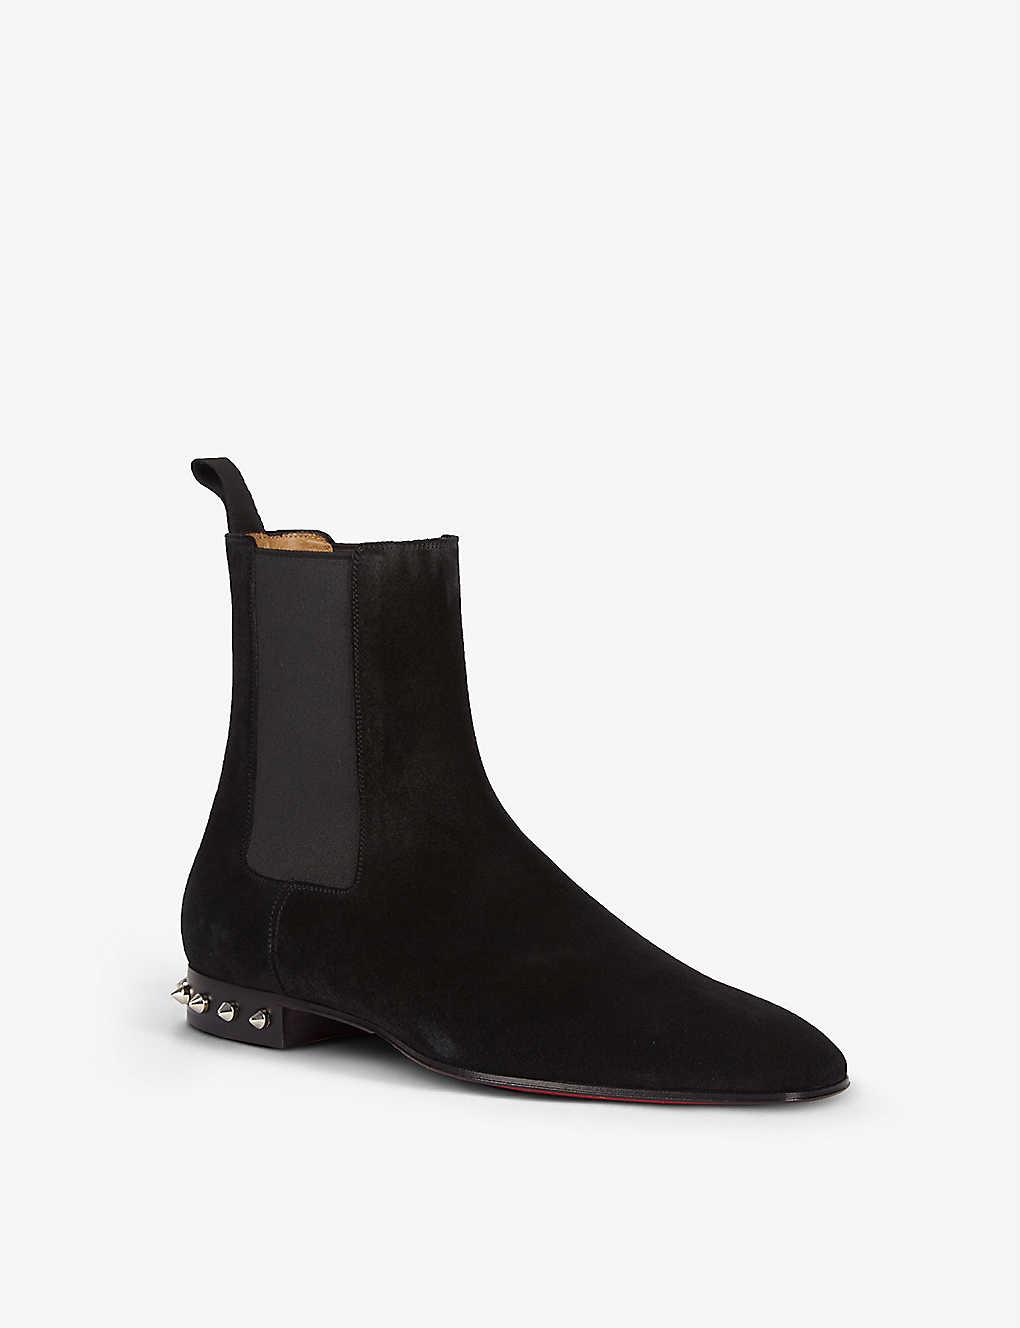 Christian Louboutin Roadie Flat  Red bottom heels christian louboutin,  Christian louboutin men, Chelsea boots